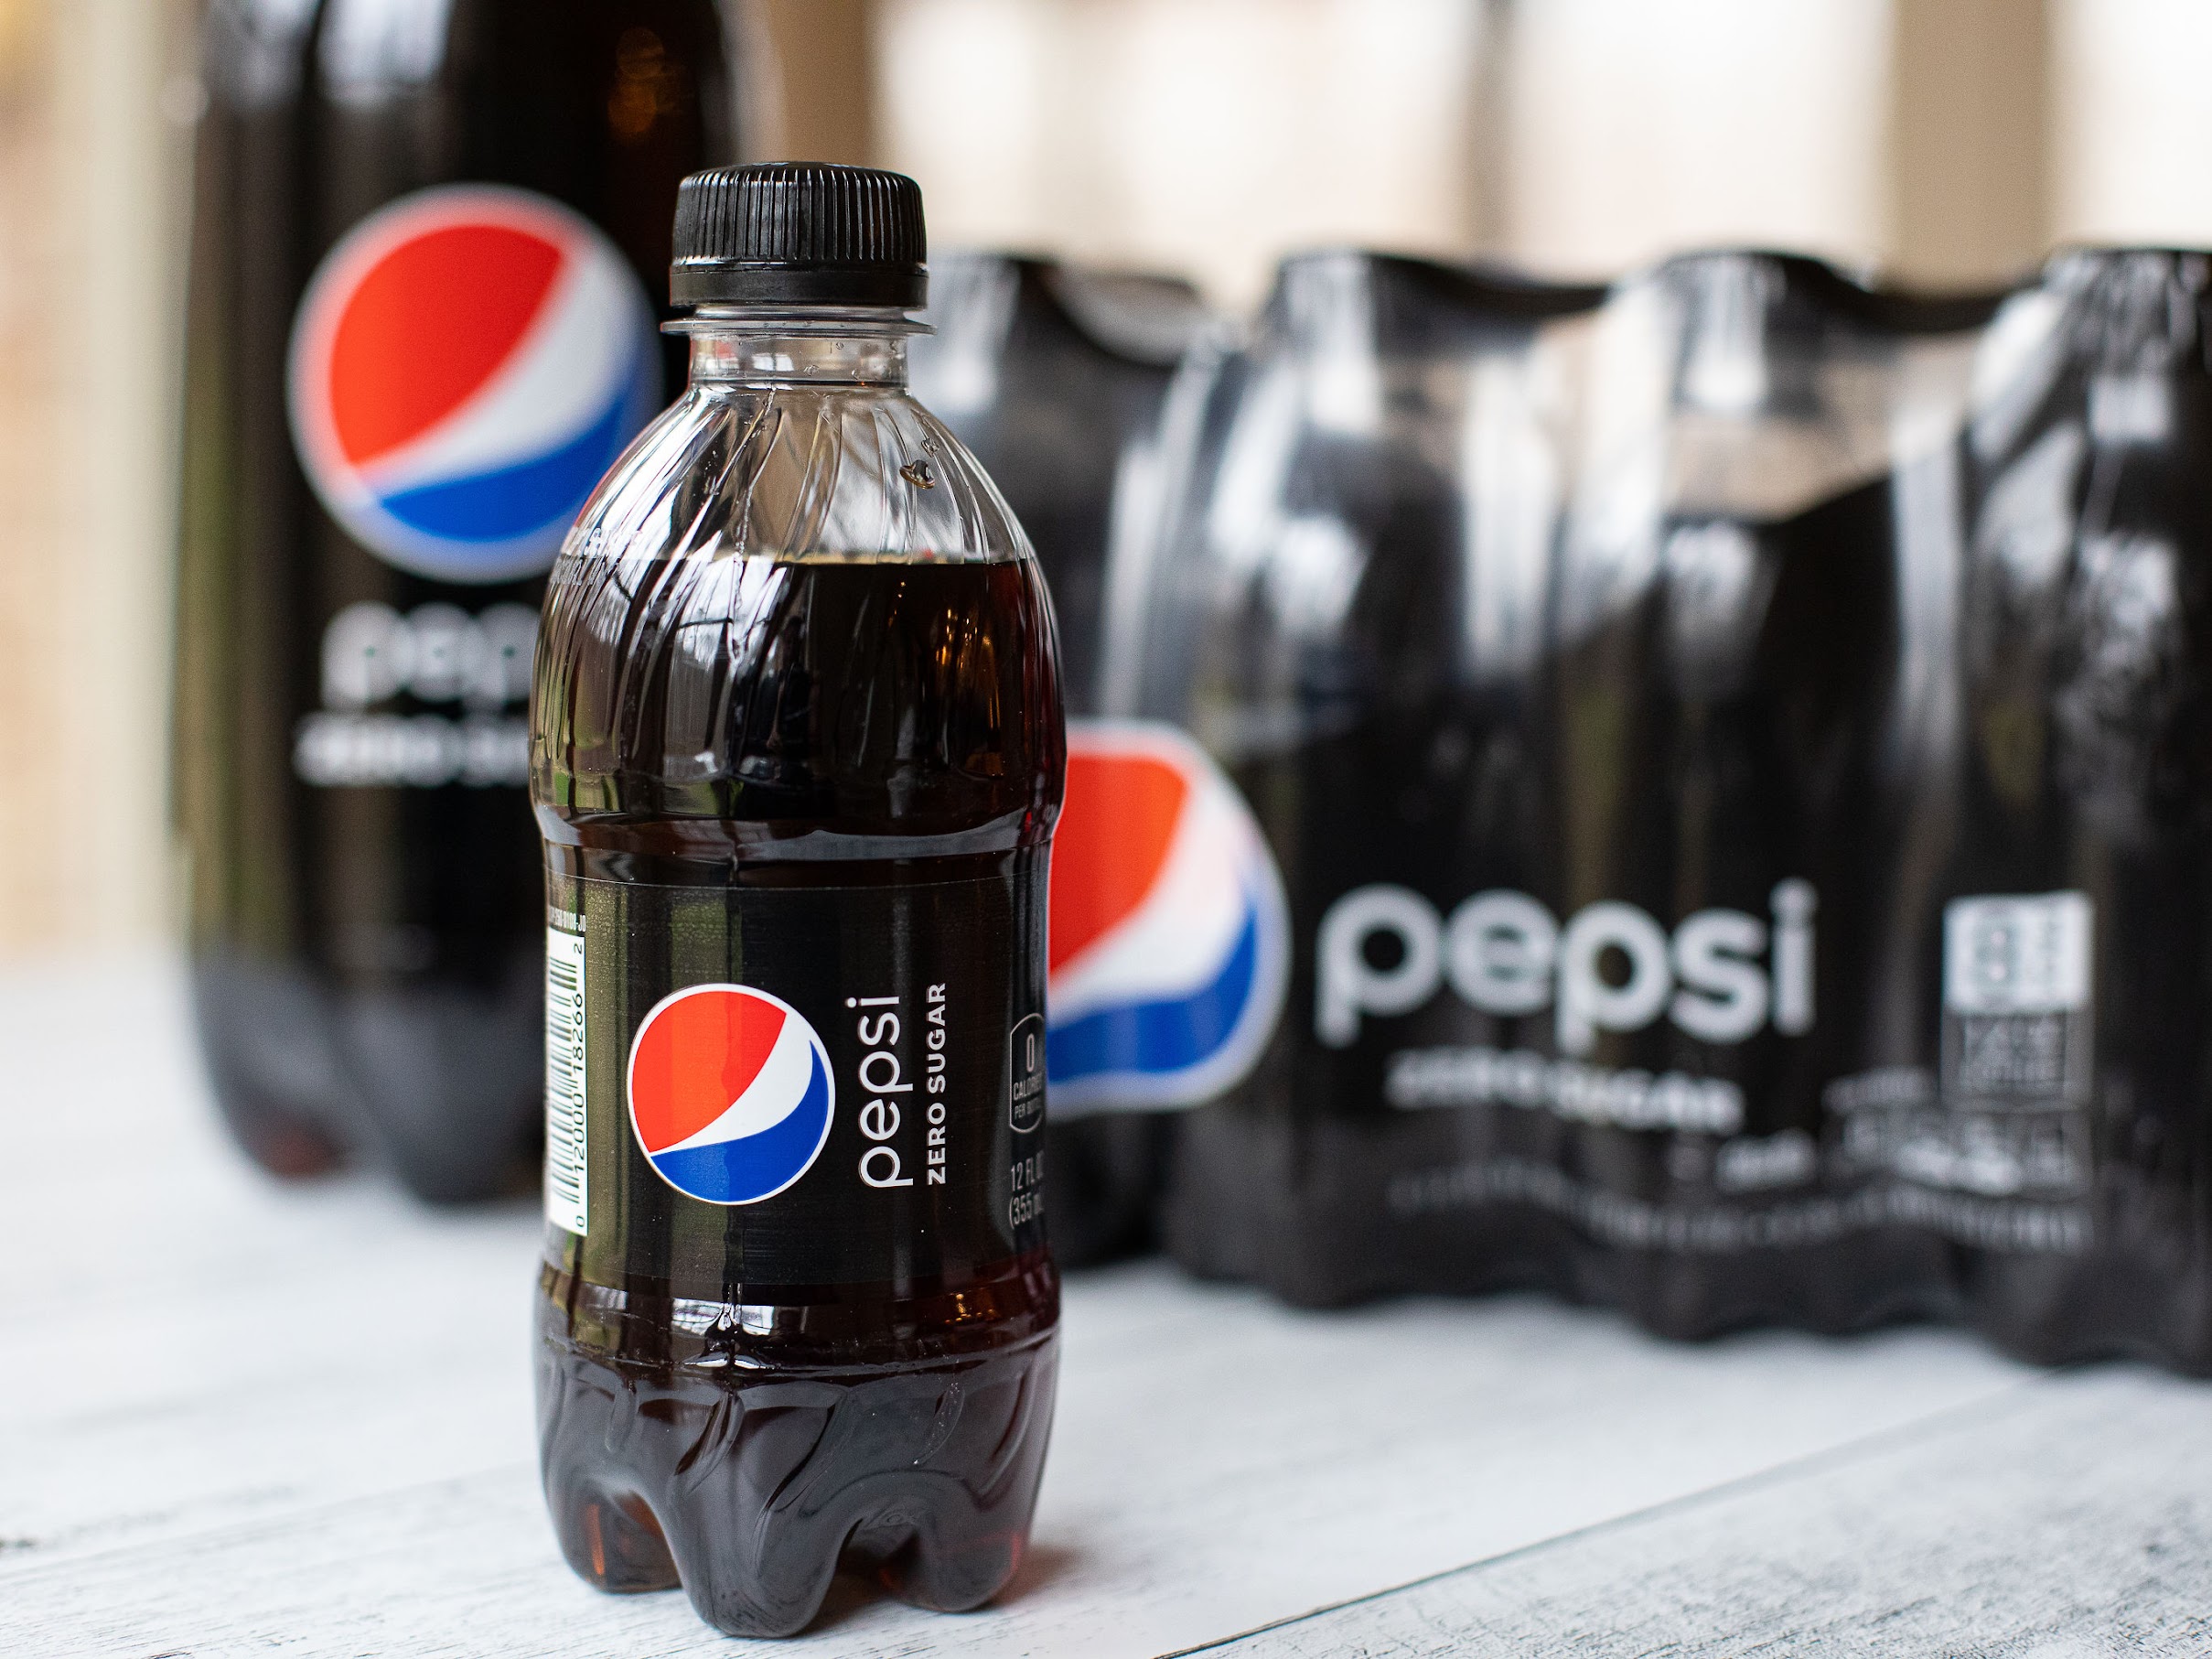 Pepsi 6-Pack or 8-Pack Bottles Of Soda As Low As $3.15 At Publix (Regular Price $7.49)